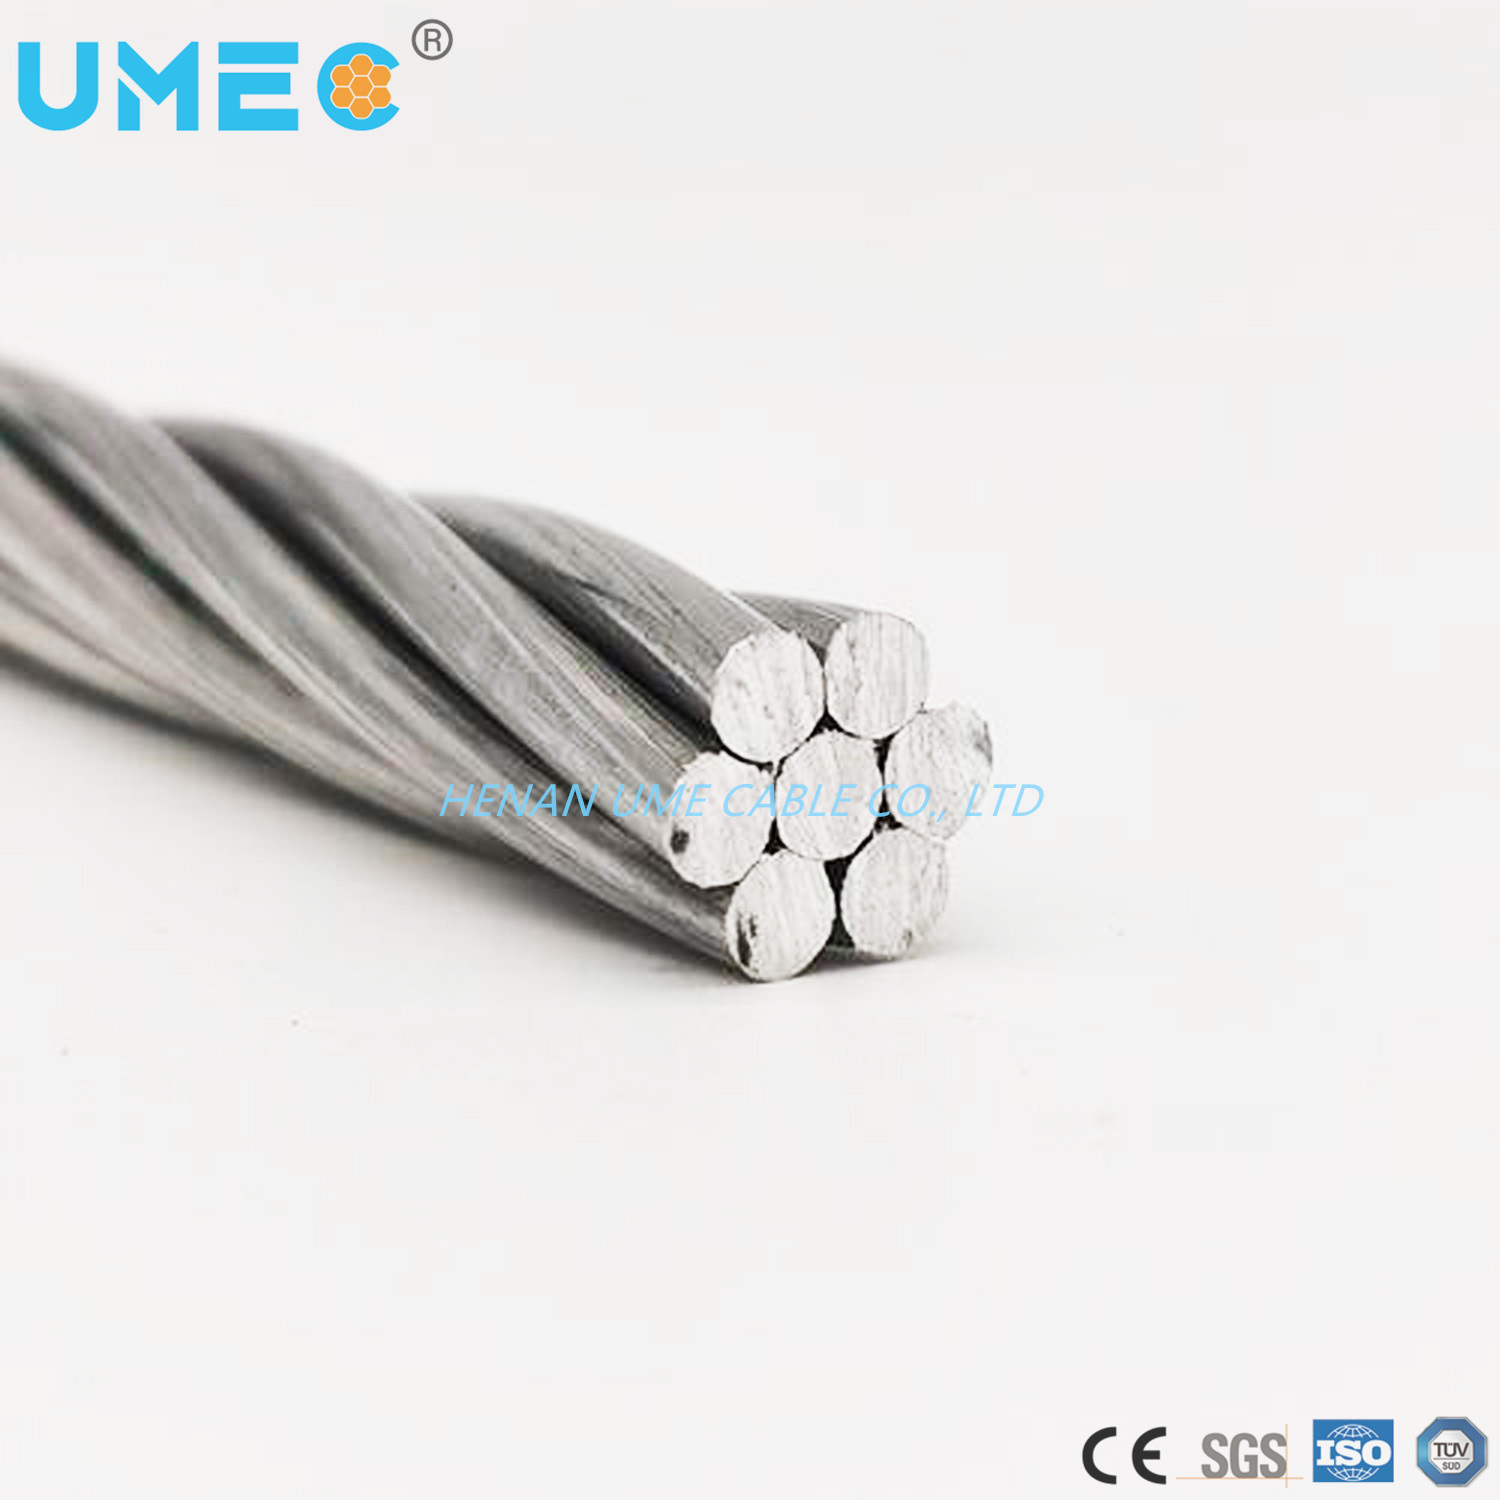 The Best Electrical Distribution Line All Aluminum Conductor AAC